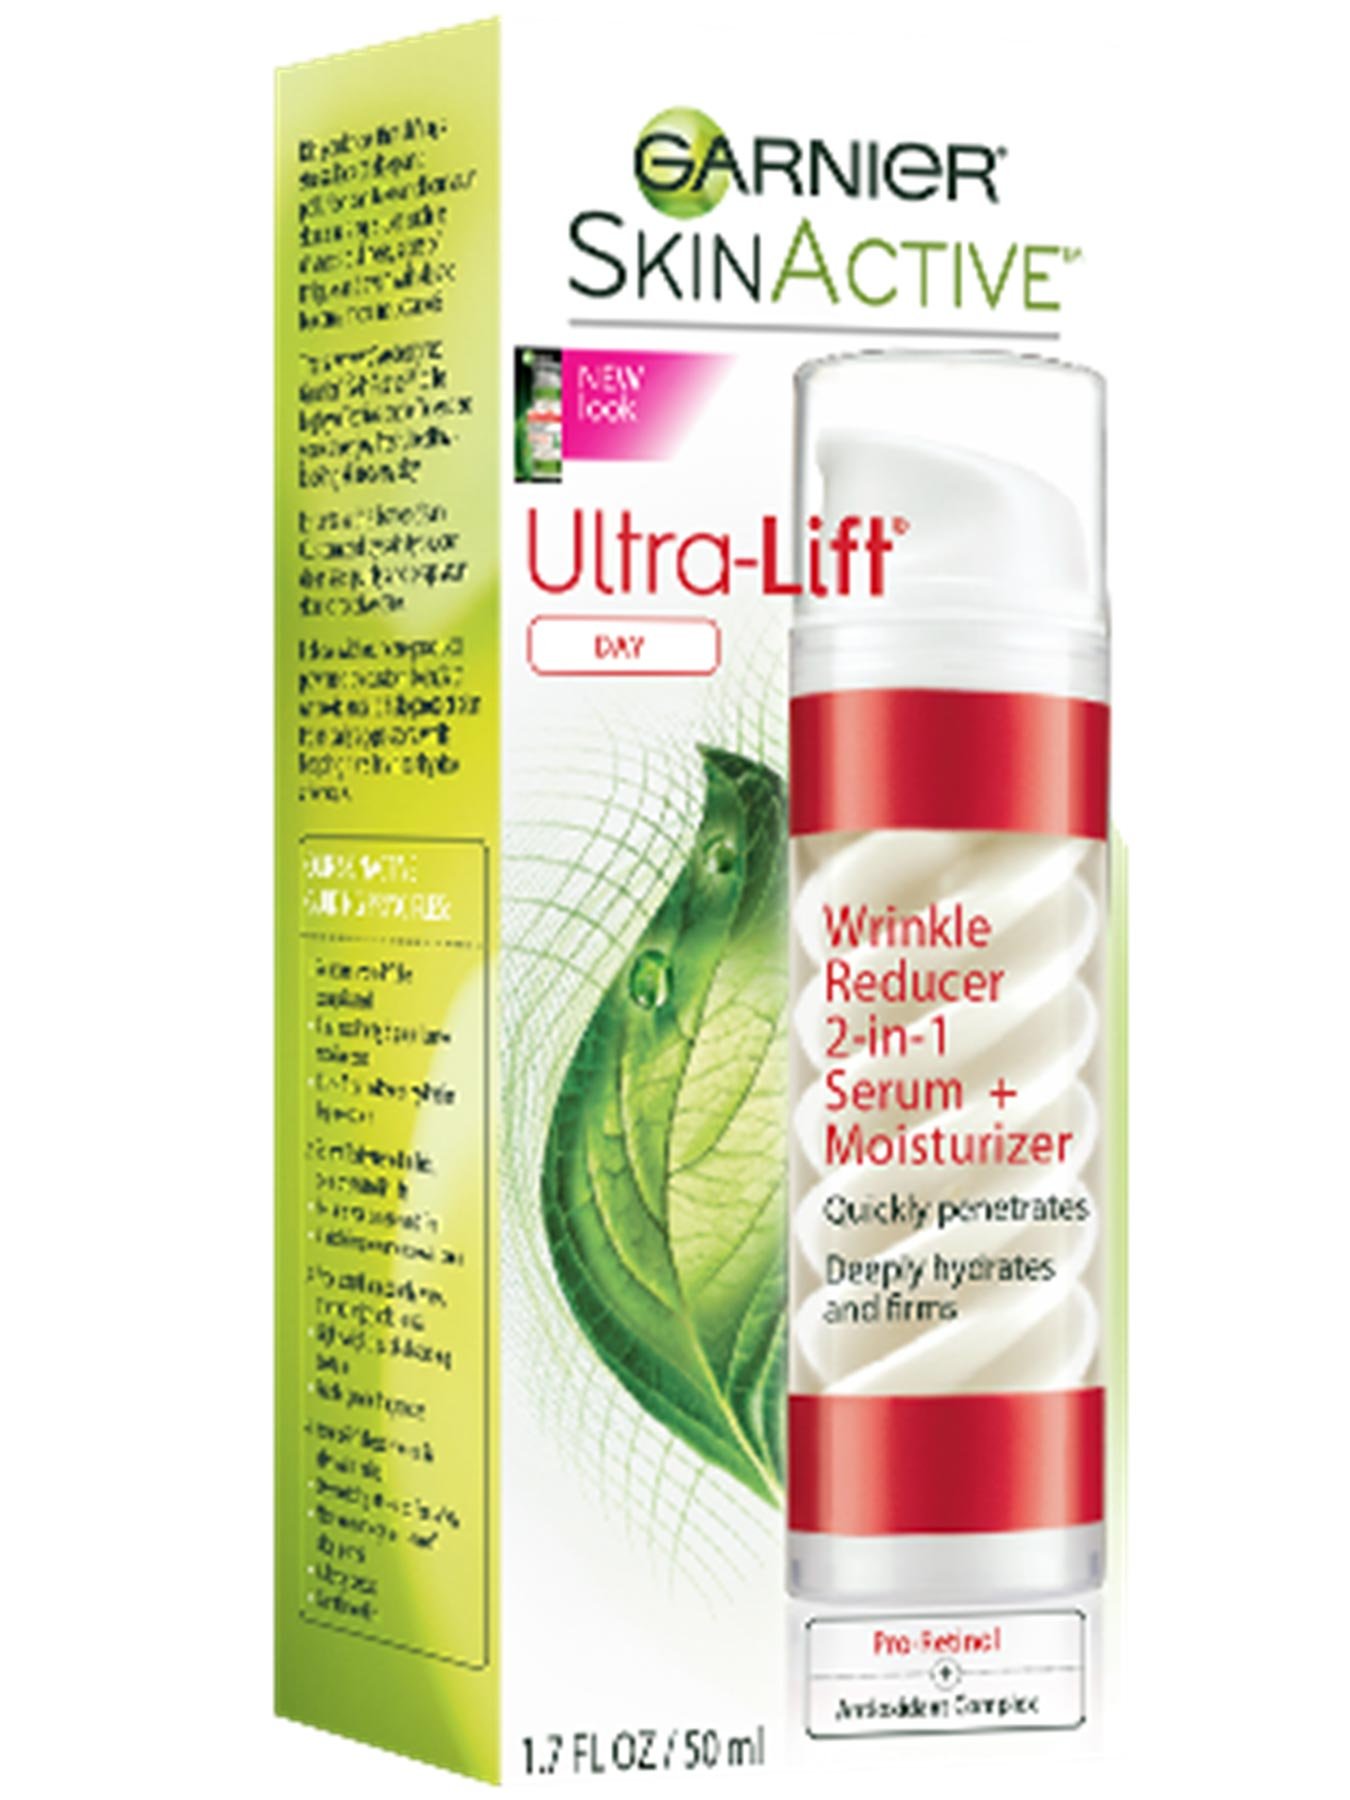 Front view of Ultra-Lift 2-in-1 Serum + Moisturizer box.